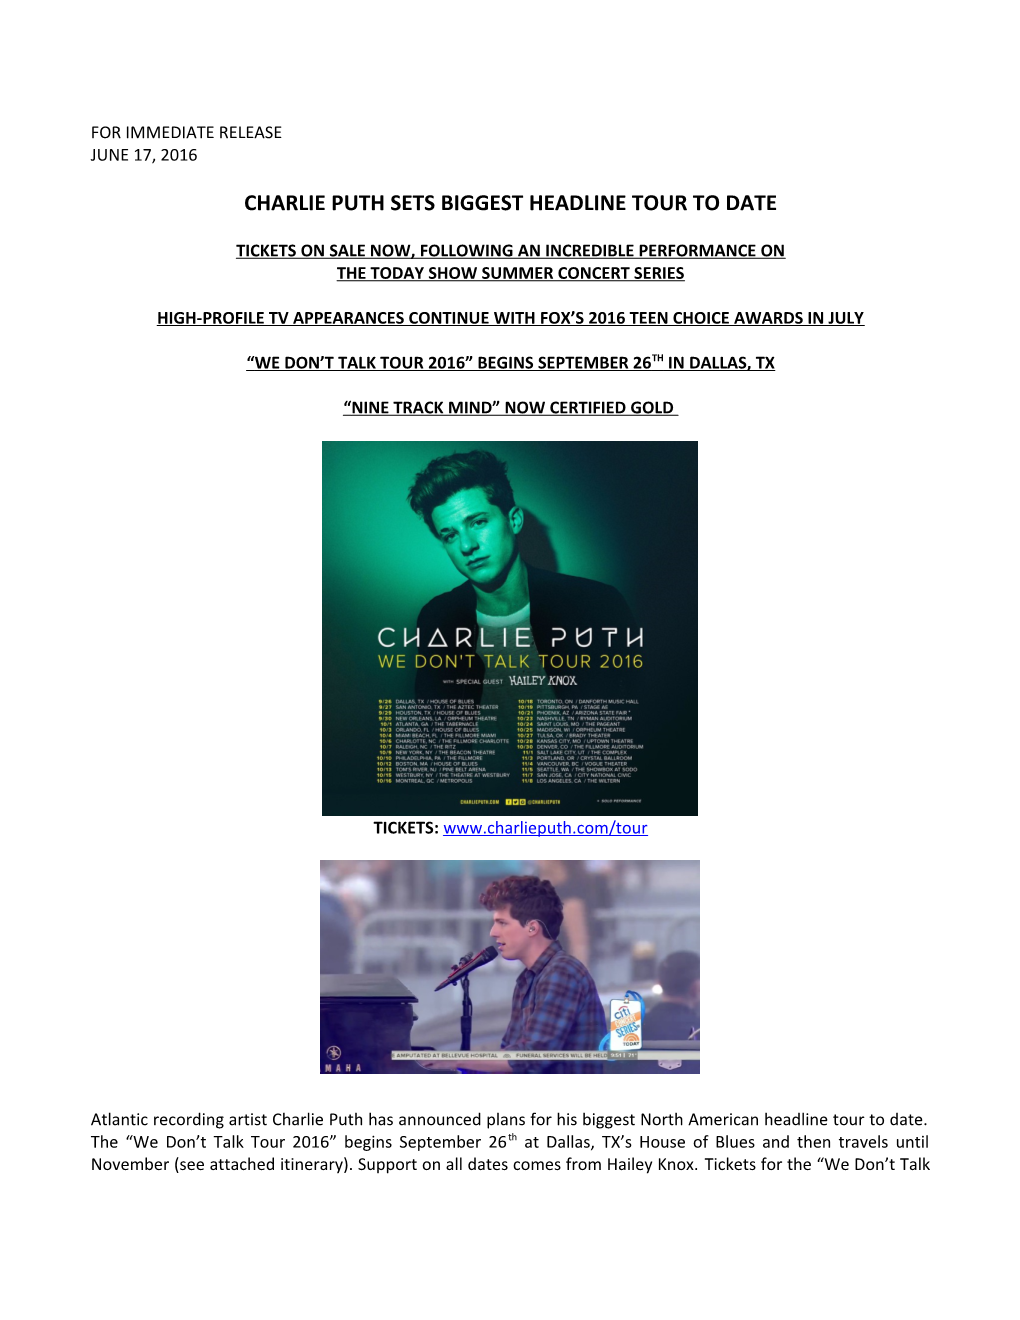 Charlie Puth Sets Biggest Headline Tour to Date